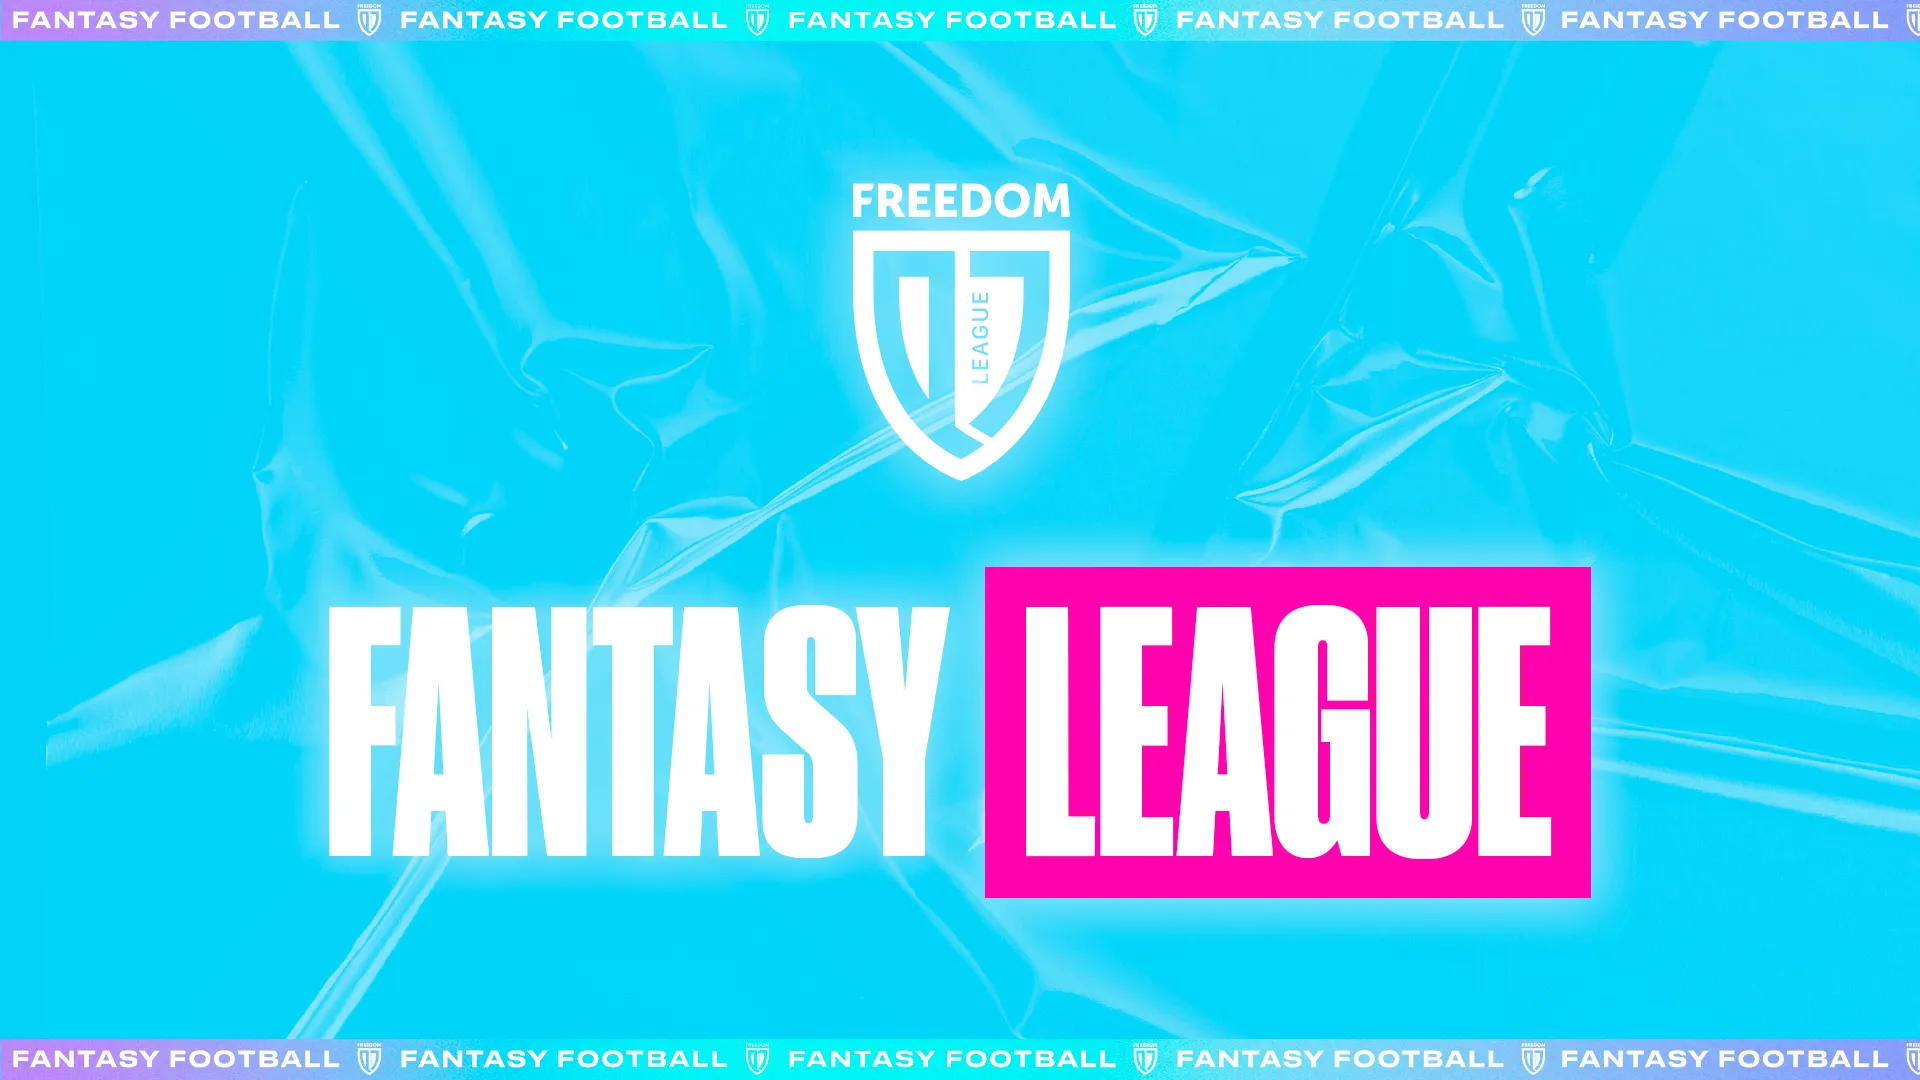 Welcome to Fantasy-Football!